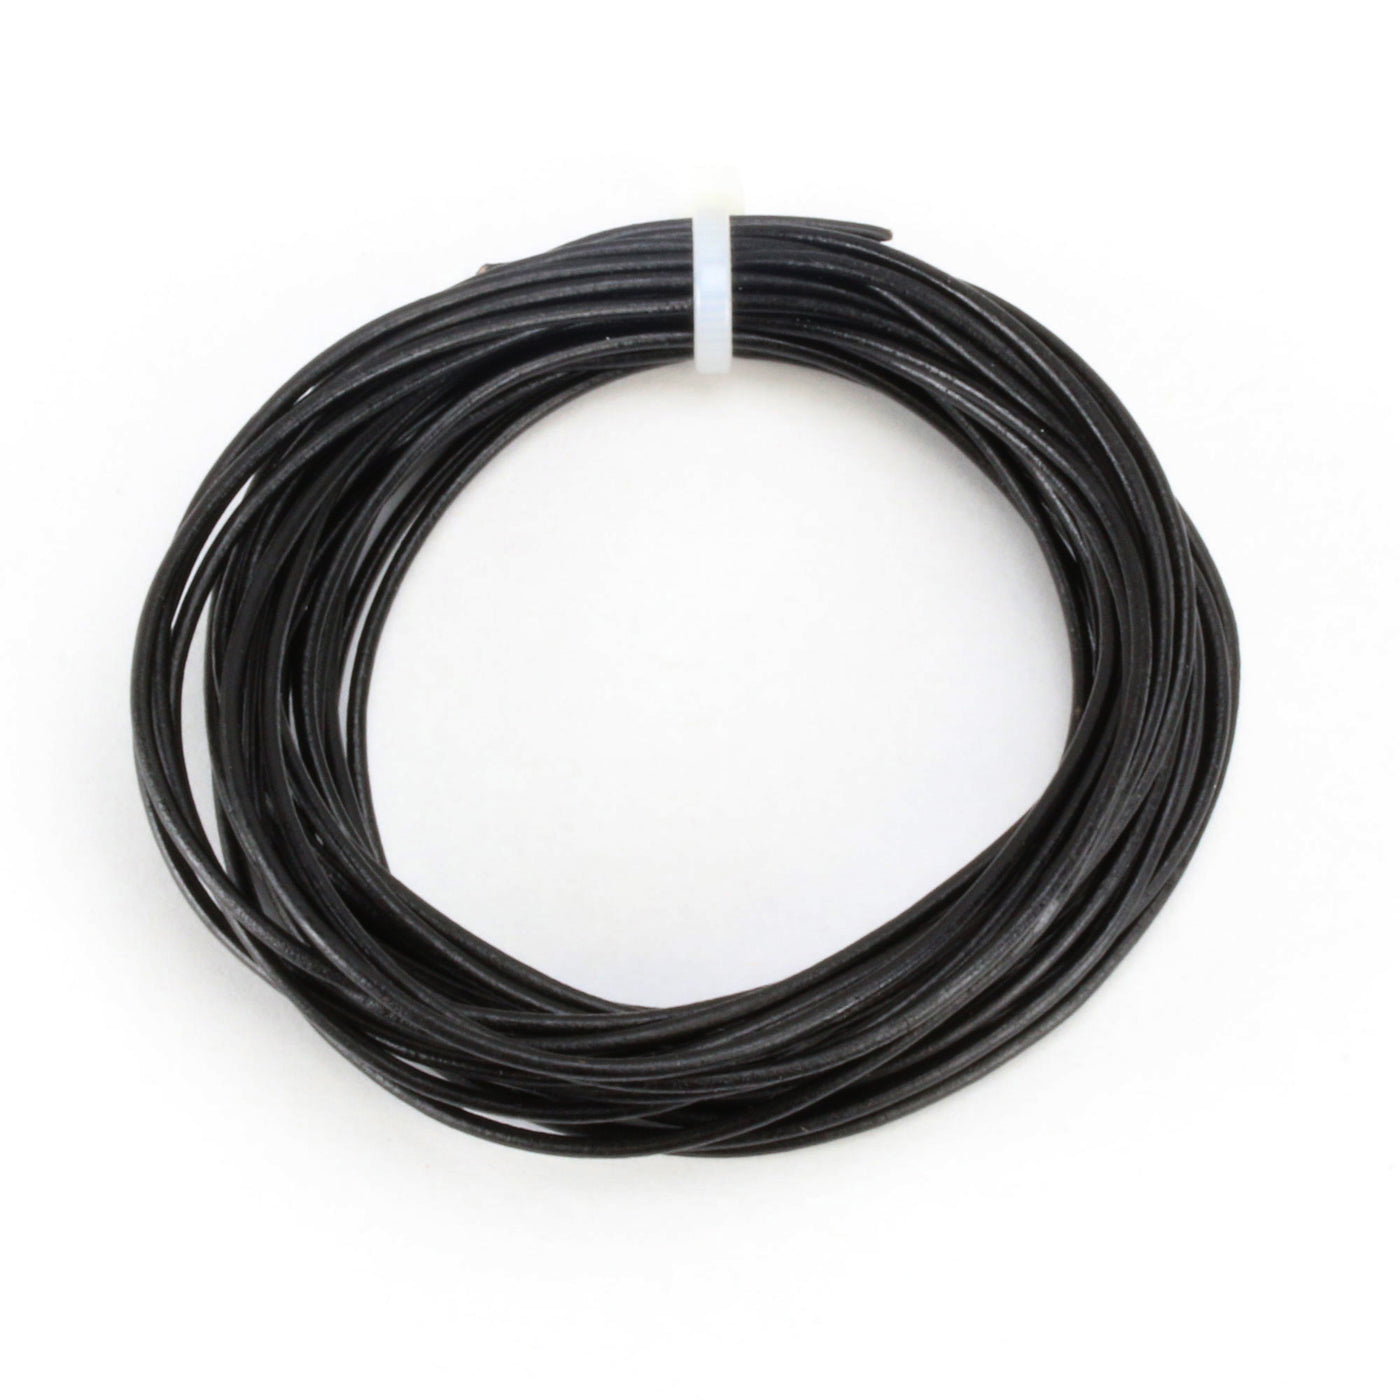 Leather Cord, Round 1.5mm, Black 5 Meters – Beaducation